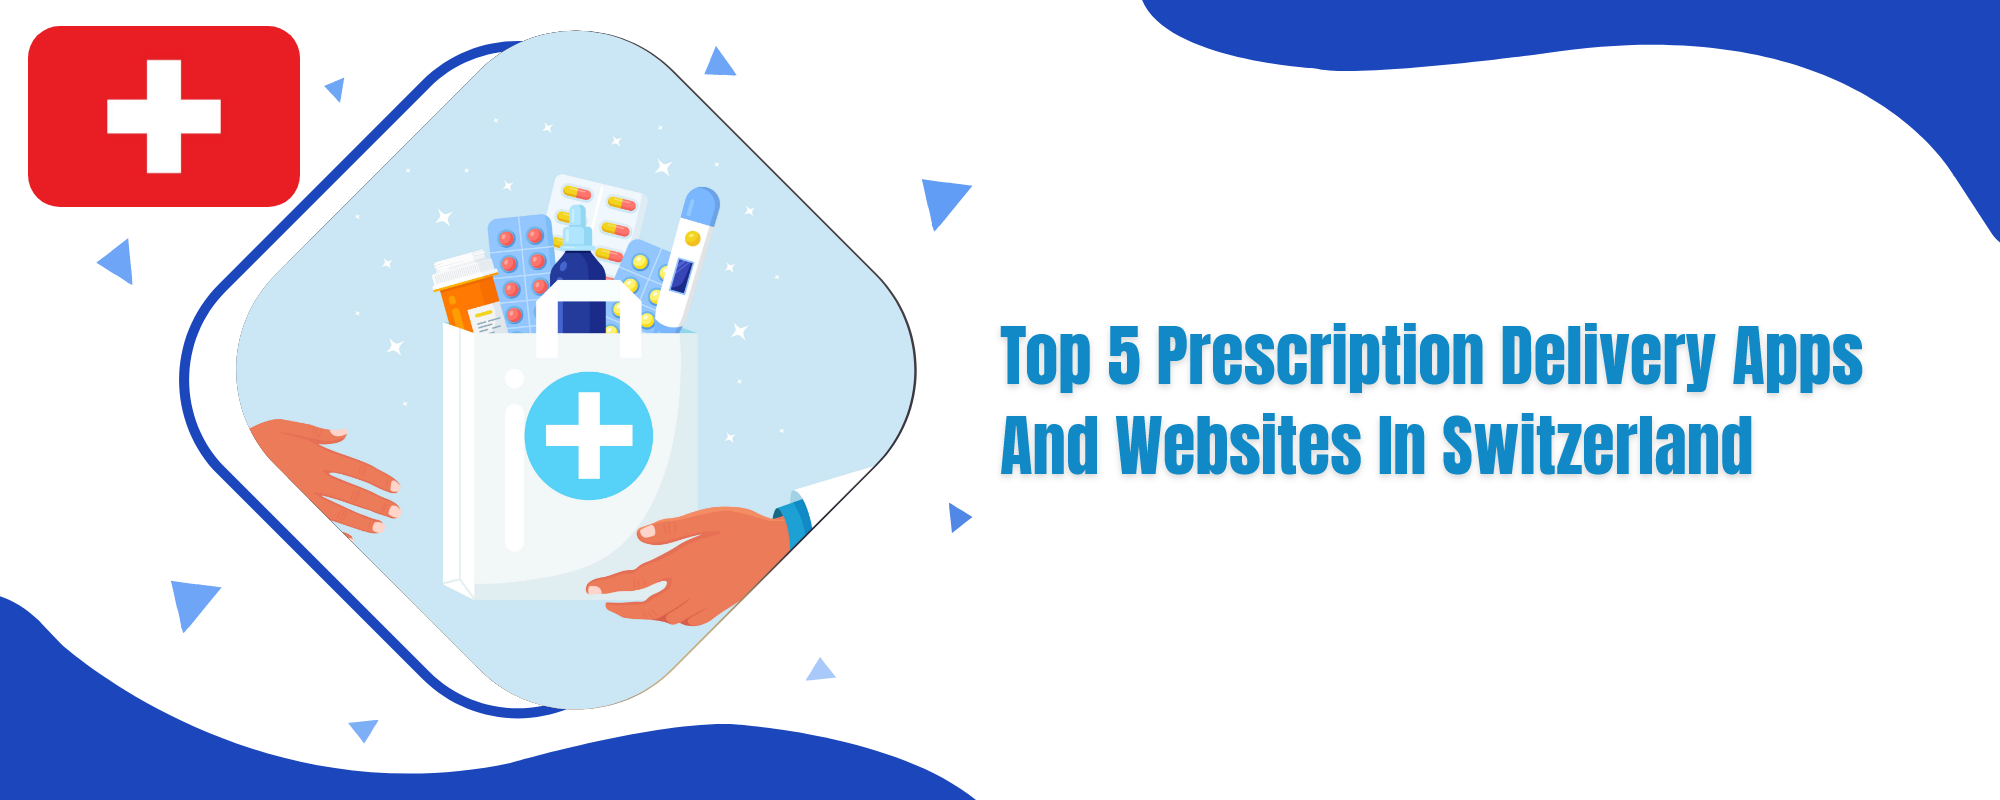 Top 5 prescription delivery apps and websites in Switzerland